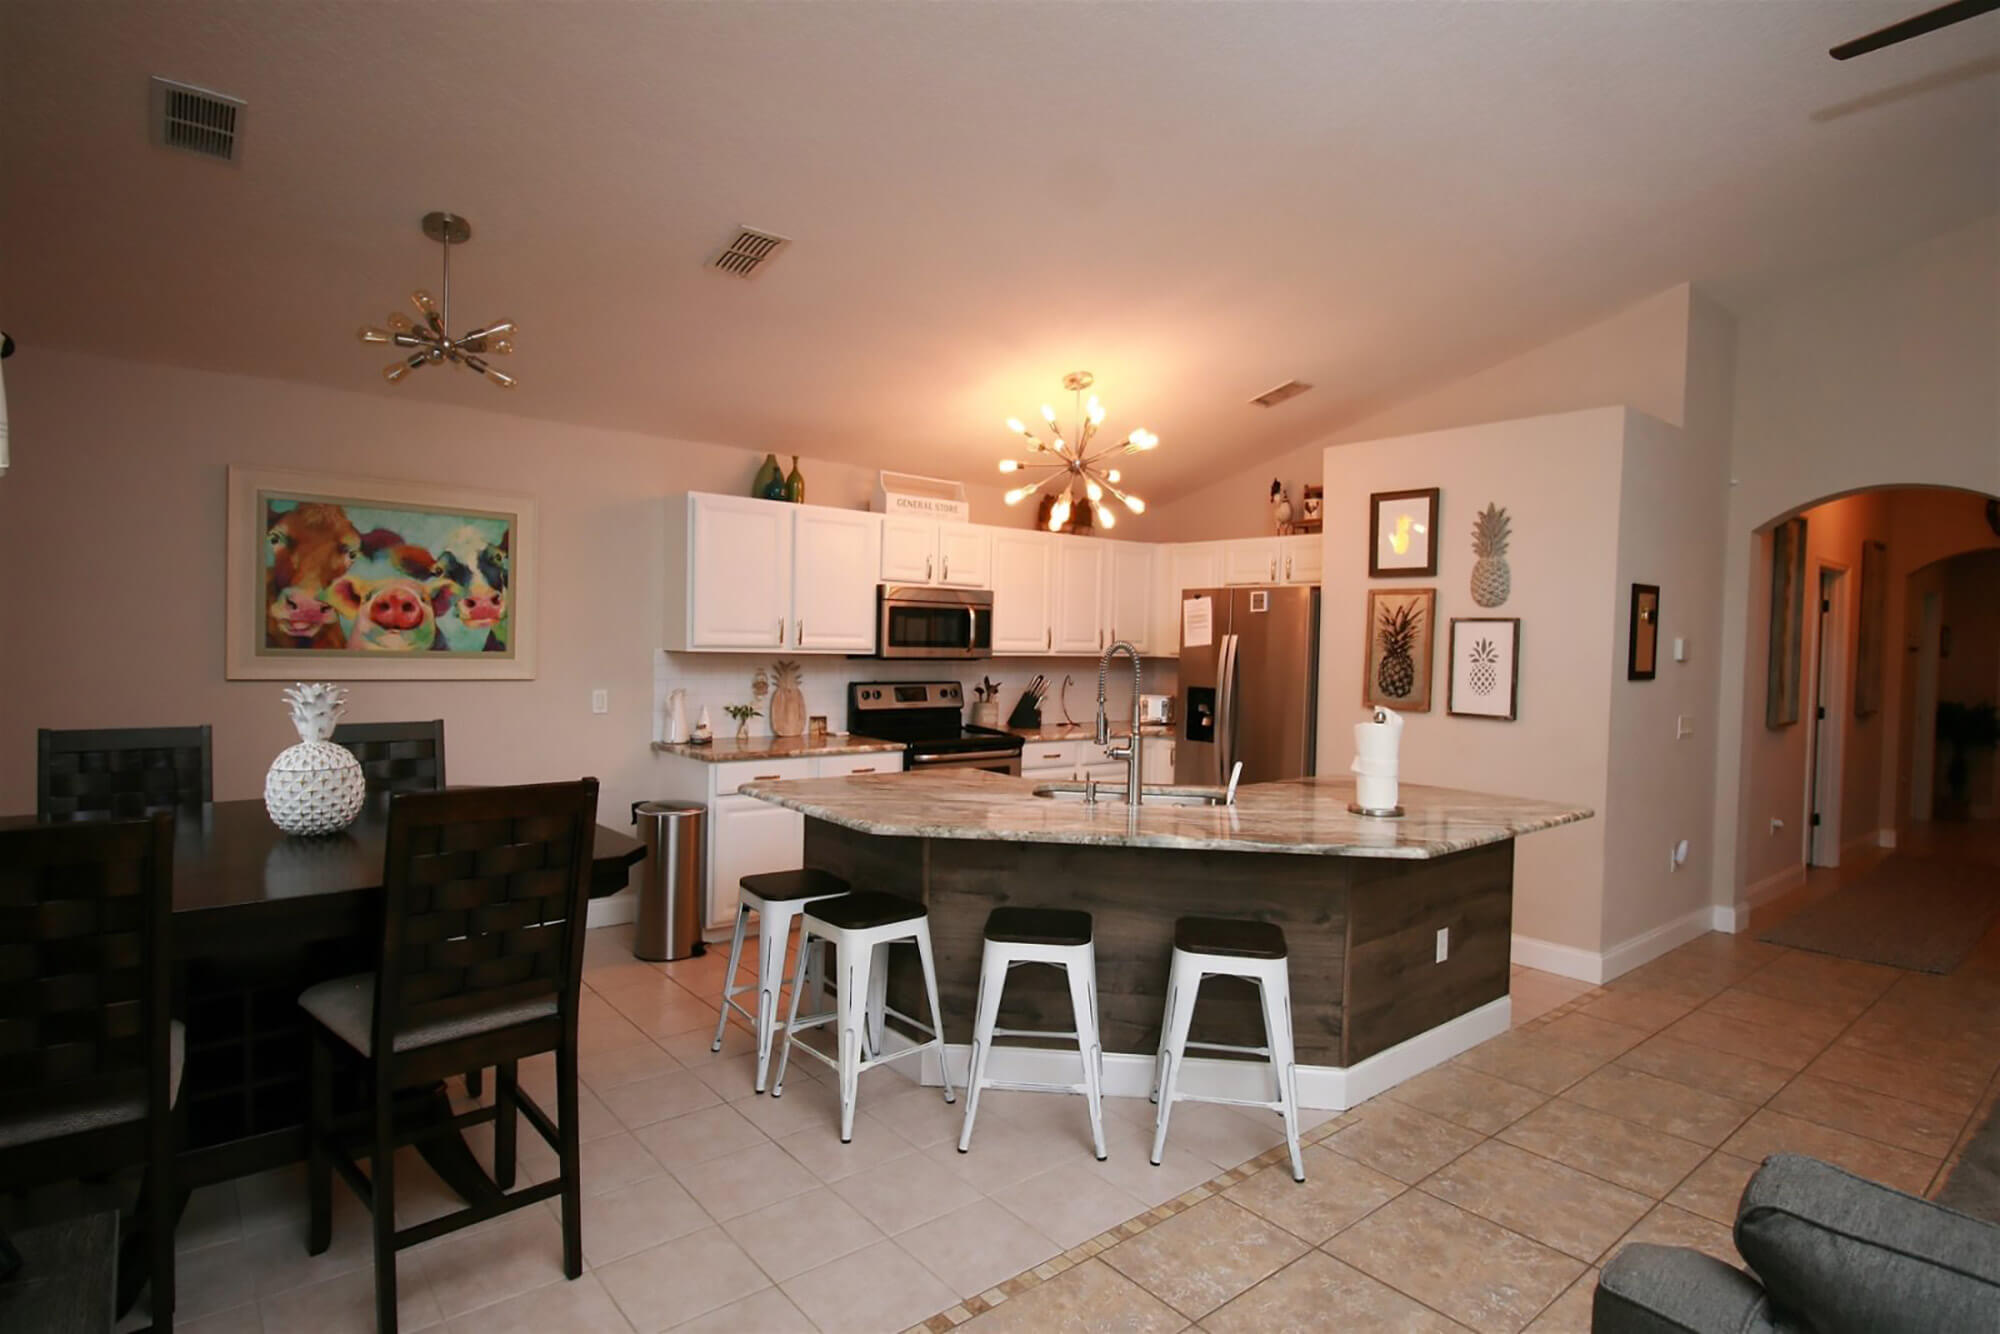 kitchen and dining area of Southern Dream Vacation Rentals home